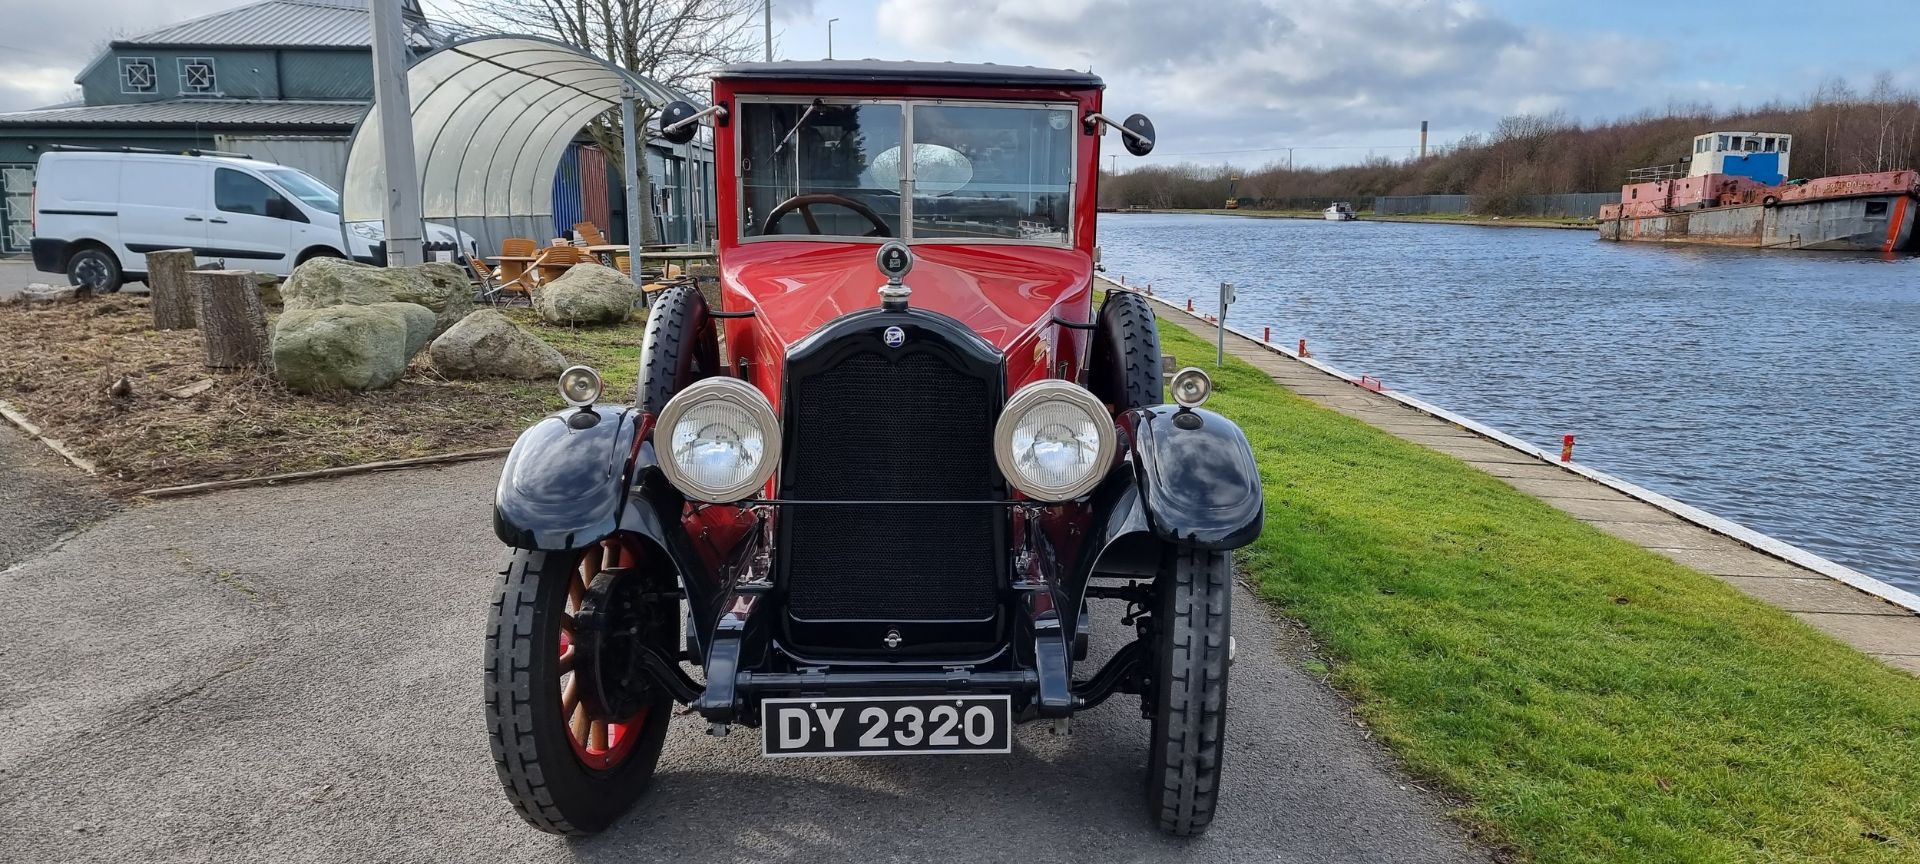 1922 Buick McLaughlin Limousine, 4086cc. Registration number DY 2320. Chassis number 60259. Engine - Image 3 of 37